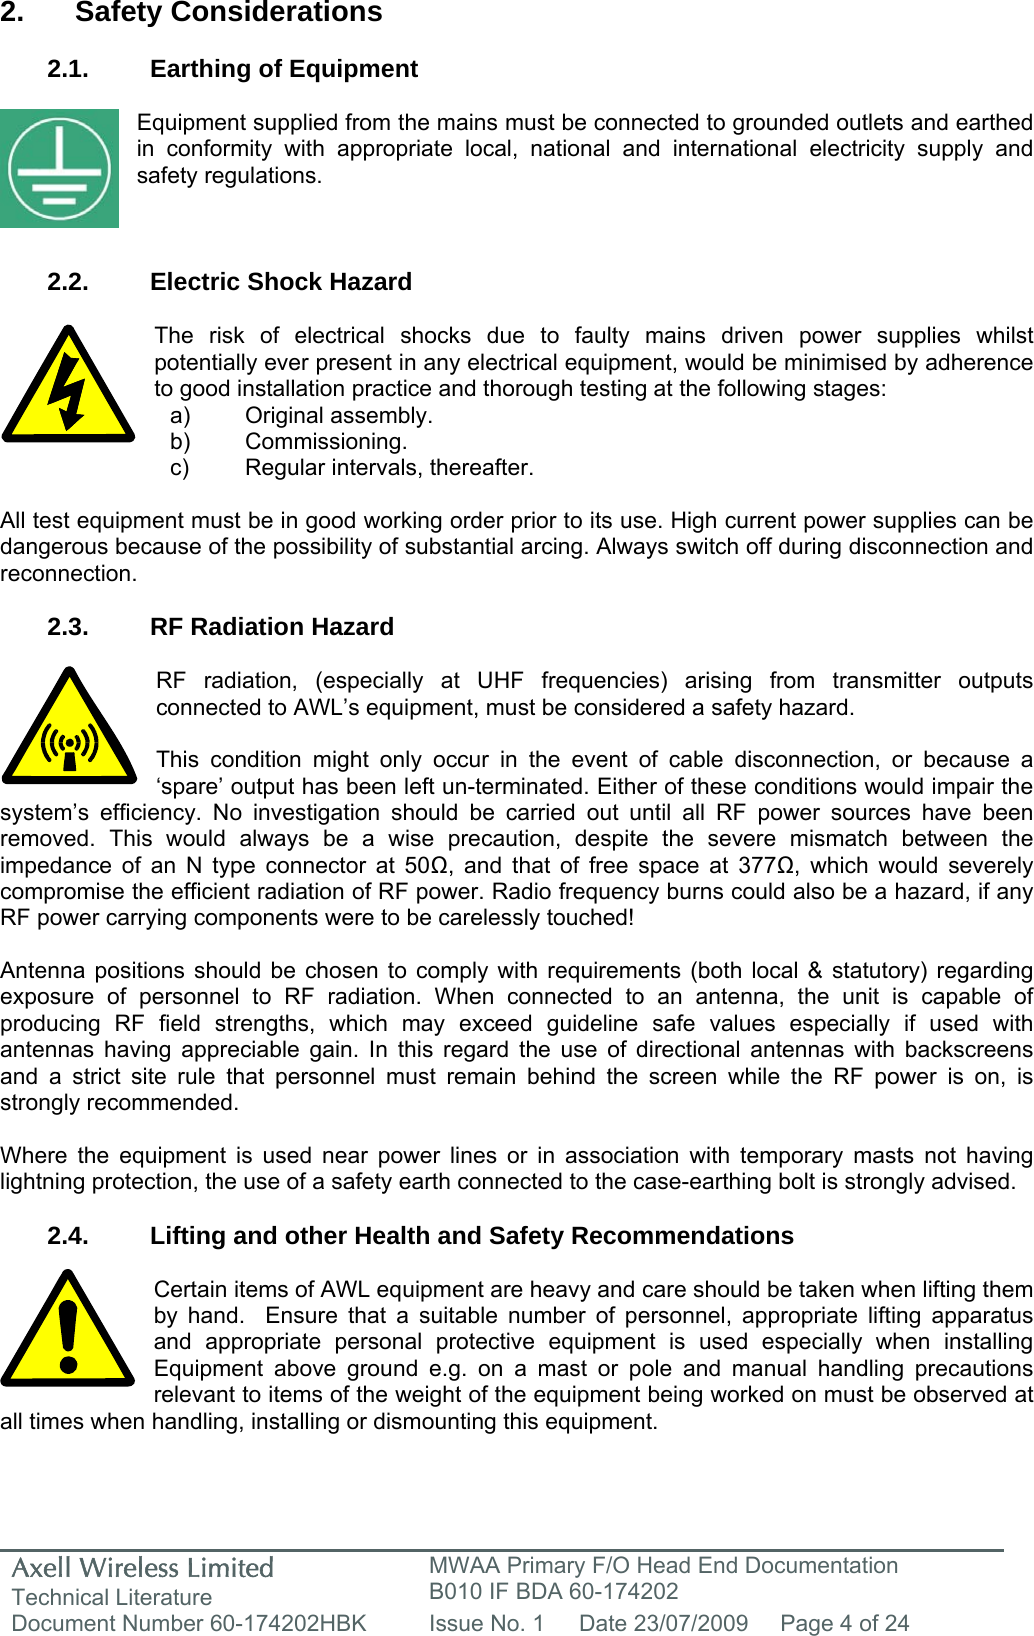 Axell Wireless Limited Technical Literature MWAA Primary F/O Head End Documentation B010 IF BDA 60-174202 Document Number 60-174202HBK  Issue No. 1  Date 23/07/2009  Page 4 of 24   2. Safety Considerations  2.1.  Earthing of Equipment  Equipment supplied from the mains must be connected to grounded outlets and earthed in conformity with appropriate local, national and international electricity supply and safety regulations.    2.2.  Electric Shock Hazard  The risk of electrical shocks due to faulty mains driven power supplies whilst potentially ever present in any electrical equipment, would be minimised by adherence to good installation practice and thorough testing at the following stages:     All test equipment must be in good working order prior to its use. High current power supplies can be dangerous because of the possibility of substantial arcing. Always switch off during disconnection and reconnection.  2.3.  RF Radiation Hazard  RF radiation, (especially at UHF frequencies) arising from transmitter outputs connected to AWL’s equipment, must be considered a safety hazard.  This condition might only occur in the event of cable disconnection, or because a ‘spare’ output has been left un-terminated. Either of these conditions would impair the system’s efficiency. No investigation should be carried out until all RF power sources have been removed. This would always be a wise precaution, despite the severe mismatch between the impedance of an N type connector at 50Ω, and that of free space at 377Ω, which would severely compromise the efficient radiation of RF power. Radio frequency burns could also be a hazard, if any RF power carrying components were to be carelessly touched!  Antenna positions should be chosen to comply with requirements (both local &amp; statutory) regarding exposure of personnel to RF radiation. When connected to an antenna, the unit is capable of producing RF field strengths, which may exceed guideline safe values especially if used with antennas having appreciable gain. In this regard the use of directional antennas with backscreens and a strict site rule that personnel must remain behind the screen while the RF power is on, is strongly recommended.  Where the equipment is used near power lines or in association with temporary masts not having lightning protection, the use of a safety earth connected to the case-earthing bolt is strongly advised.  2.4.  Lifting and other Health and Safety Recommendations  Certain items of AWL equipment are heavy and care should be taken when lifting them by hand.  Ensure that a suitable number of personnel, appropriate lifting apparatus and appropriate personal protective equipment is used especially when installing Equipment above ground e.g. on a mast or pole and manual handling precautions relevant to items of the weight of the equipment being worked on must be observed at all times when handling, installing or dismounting this equipment.   a) Original assembly. b) Commissioning. c)  Regular intervals, thereafter. 